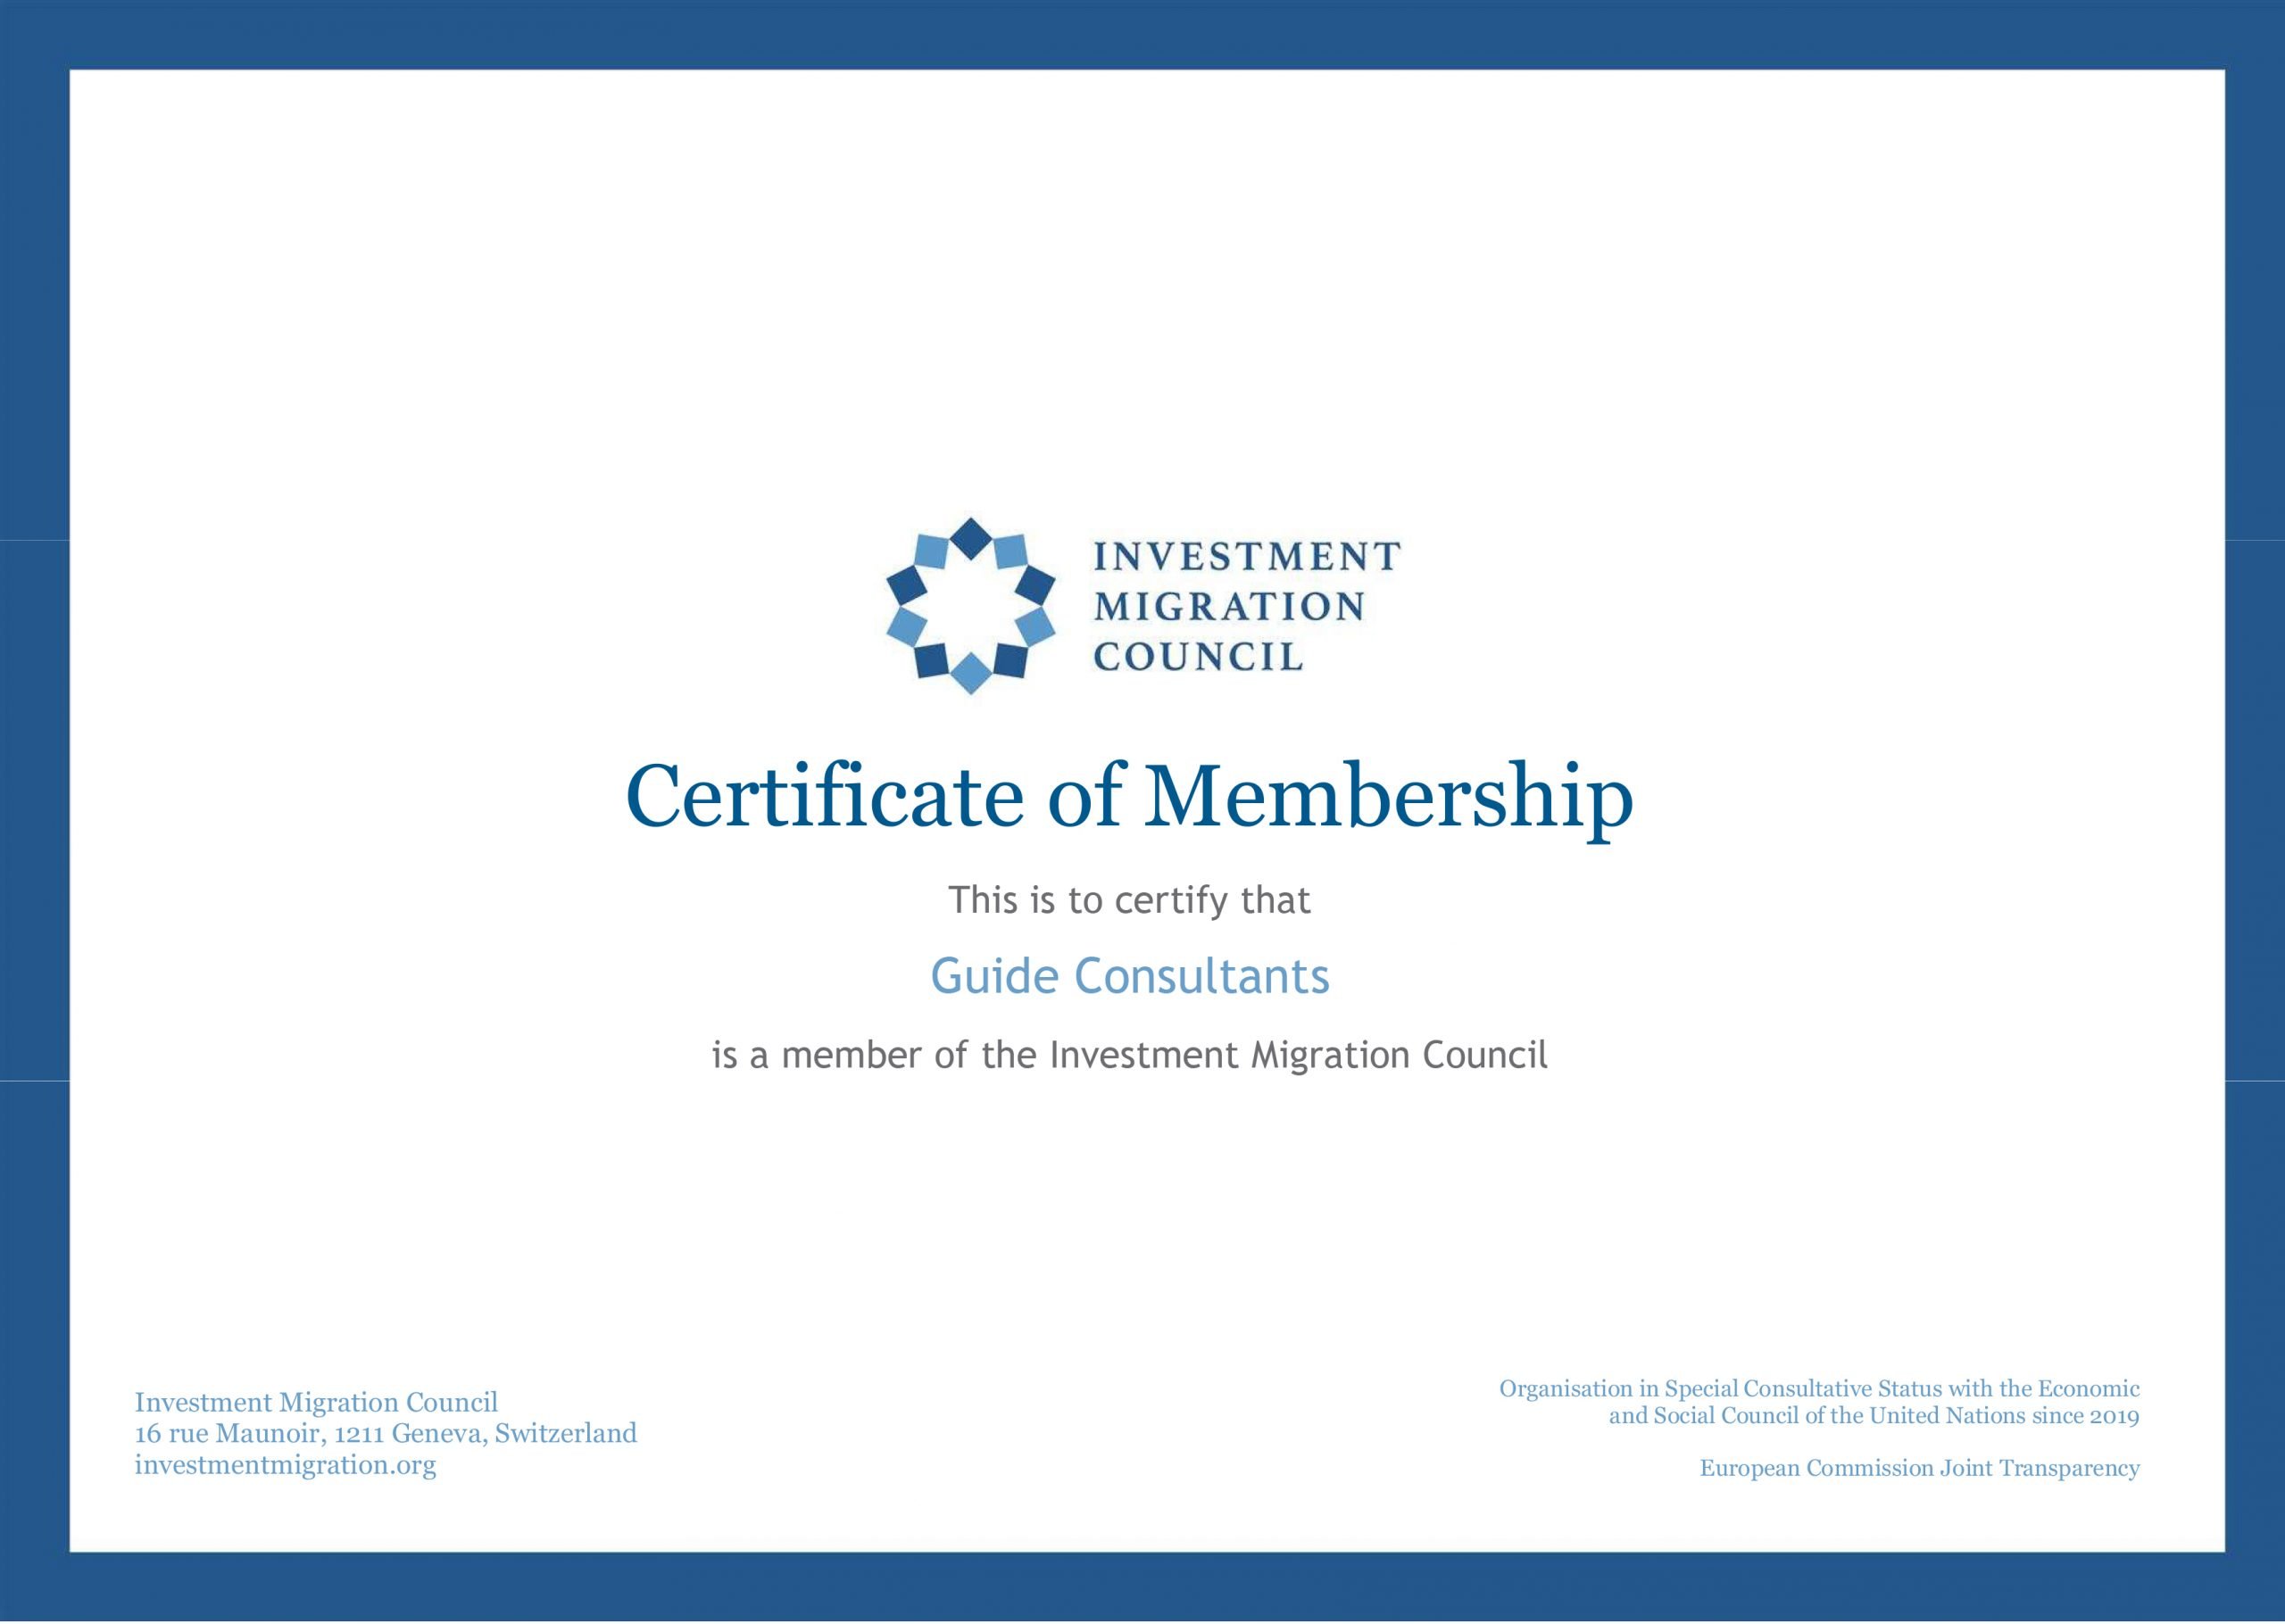 Guide Consultants becomes a member of the Investment Migration Council